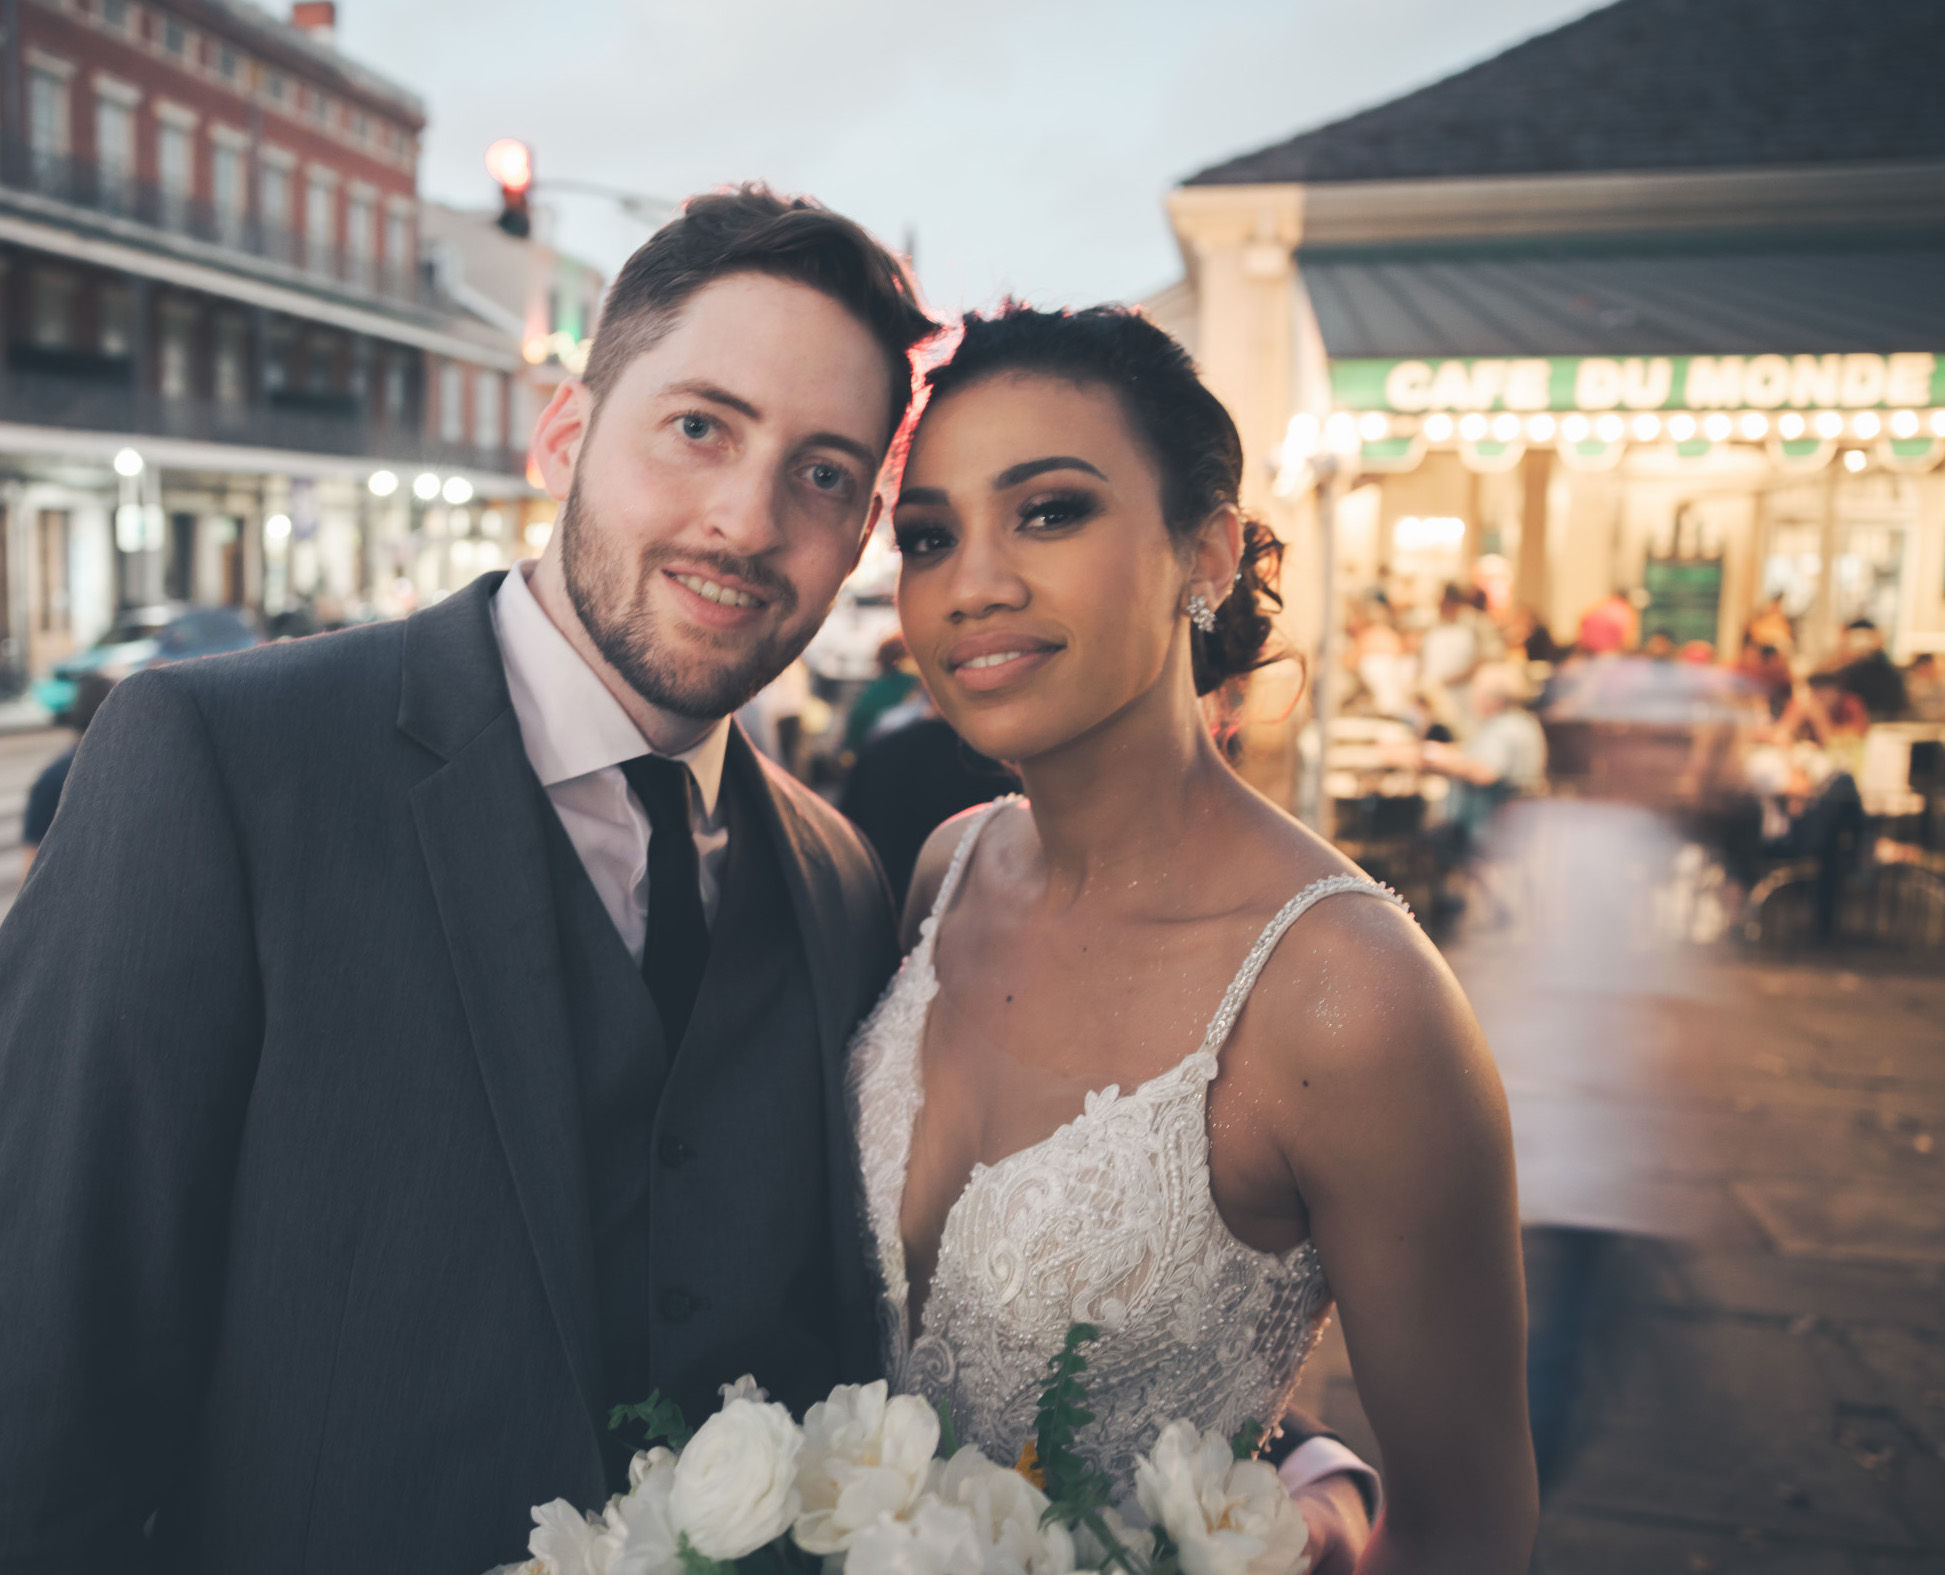 A bride and groom smile at the camera with Cafe Du Monde in the background.